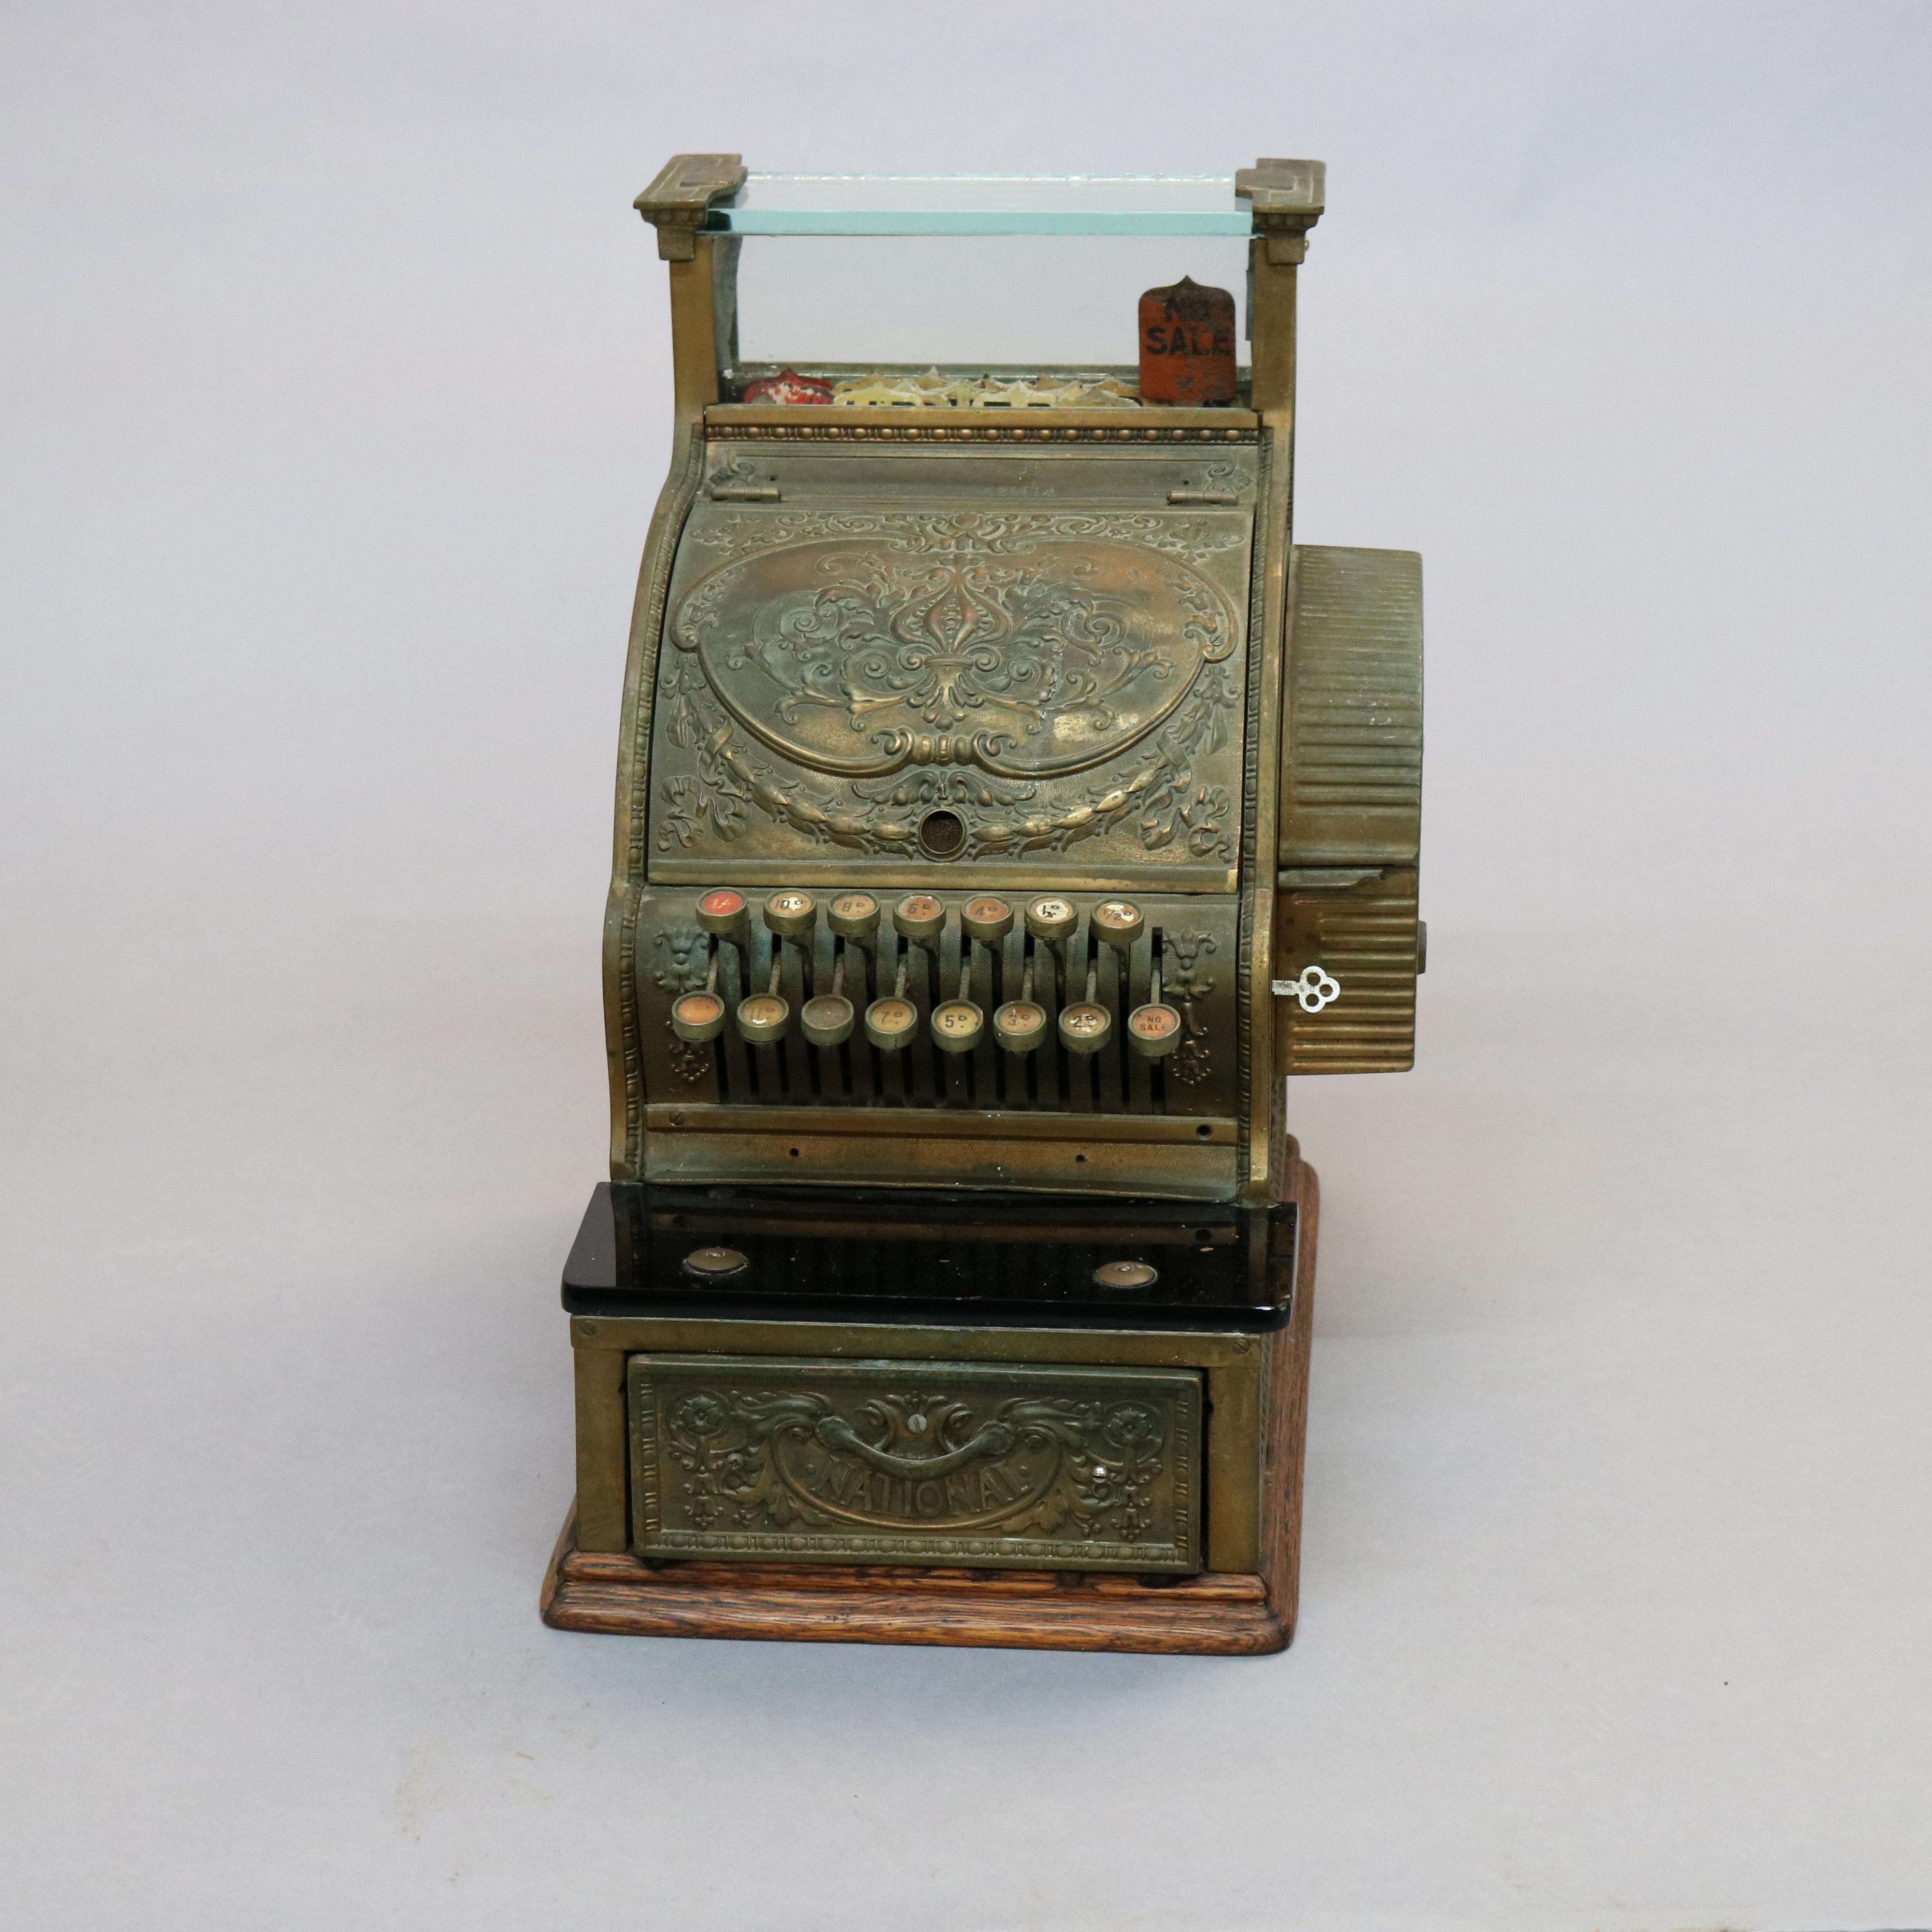 An antique country store cash register by National offers cast foliate and floral swag brass case having glass display, marble counter and seated on oak base, working and with key, c1900 

Measures: 17.25